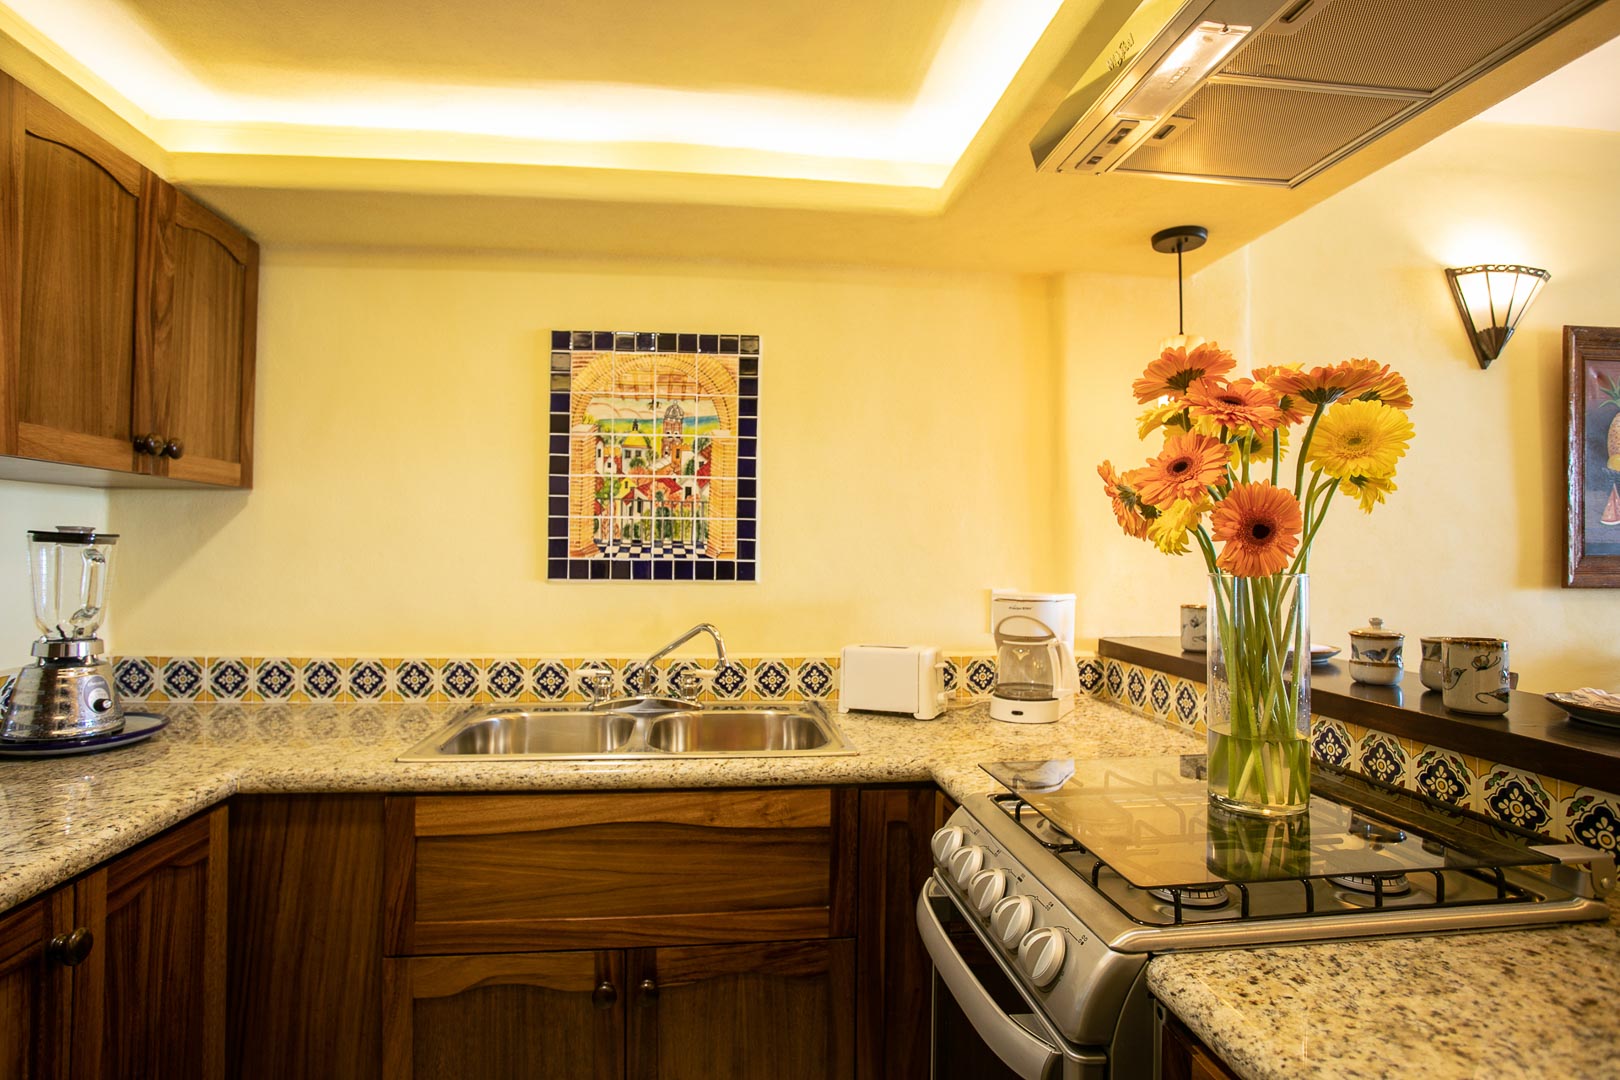 A full equipped kitchen at TPI's Lindo Mar Resort in Puerto Vallarta, Mexico.